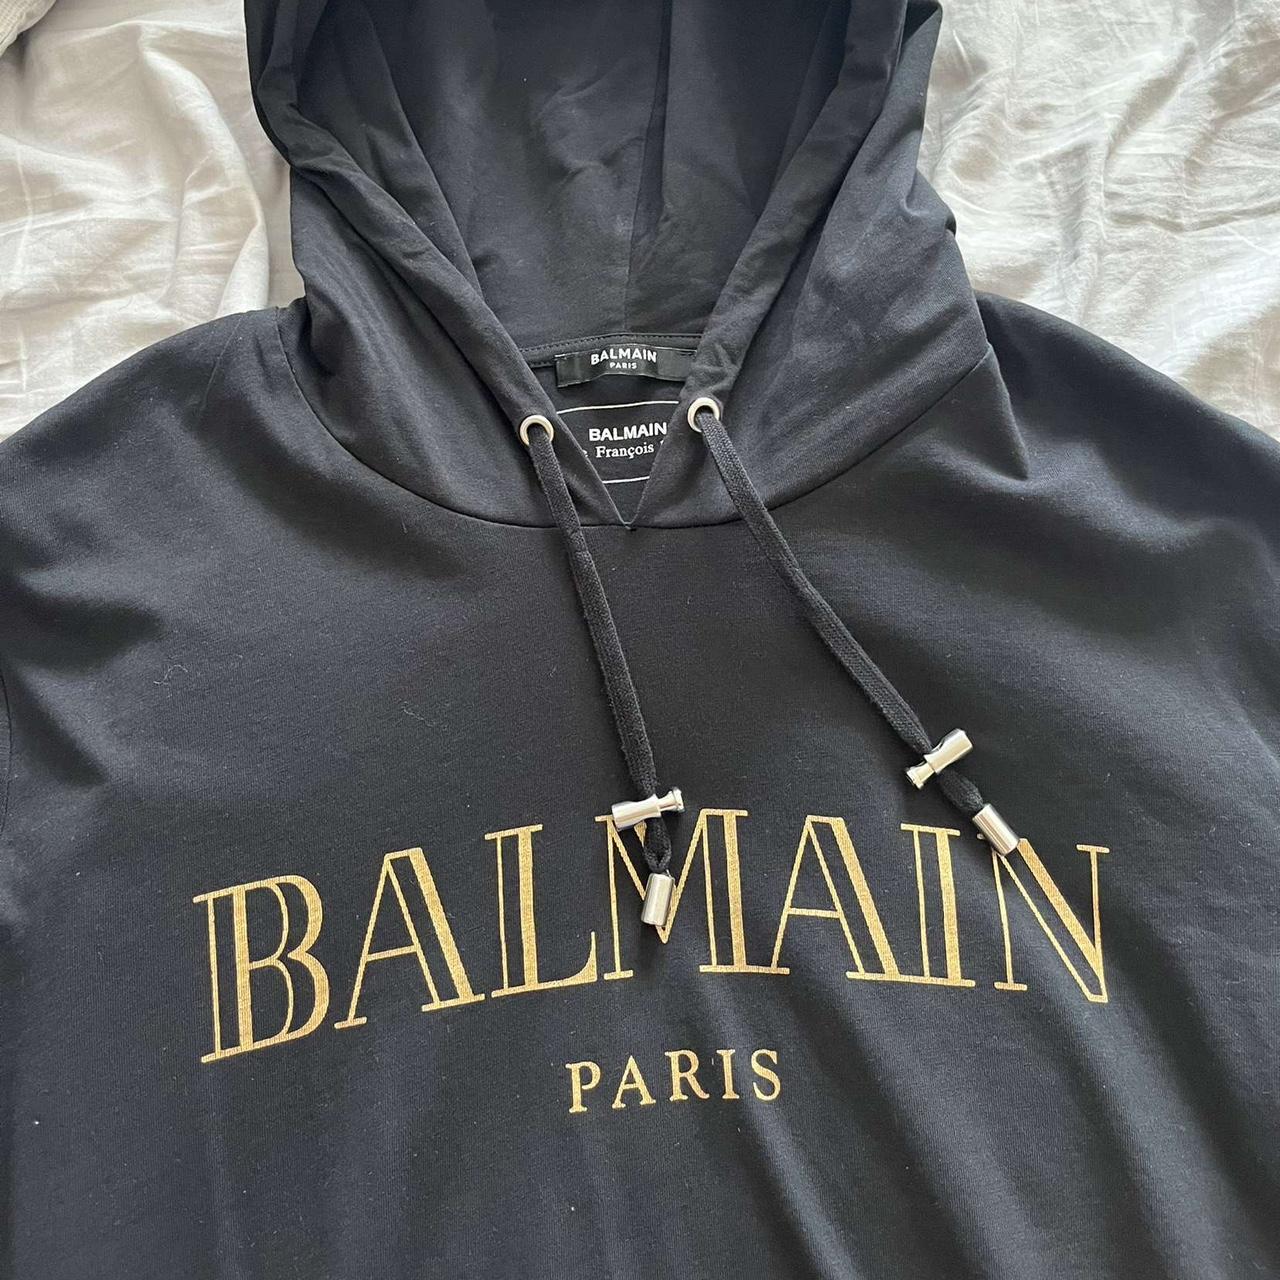 Balmain Black and Gold Hoodie Bought for 295 - Depop